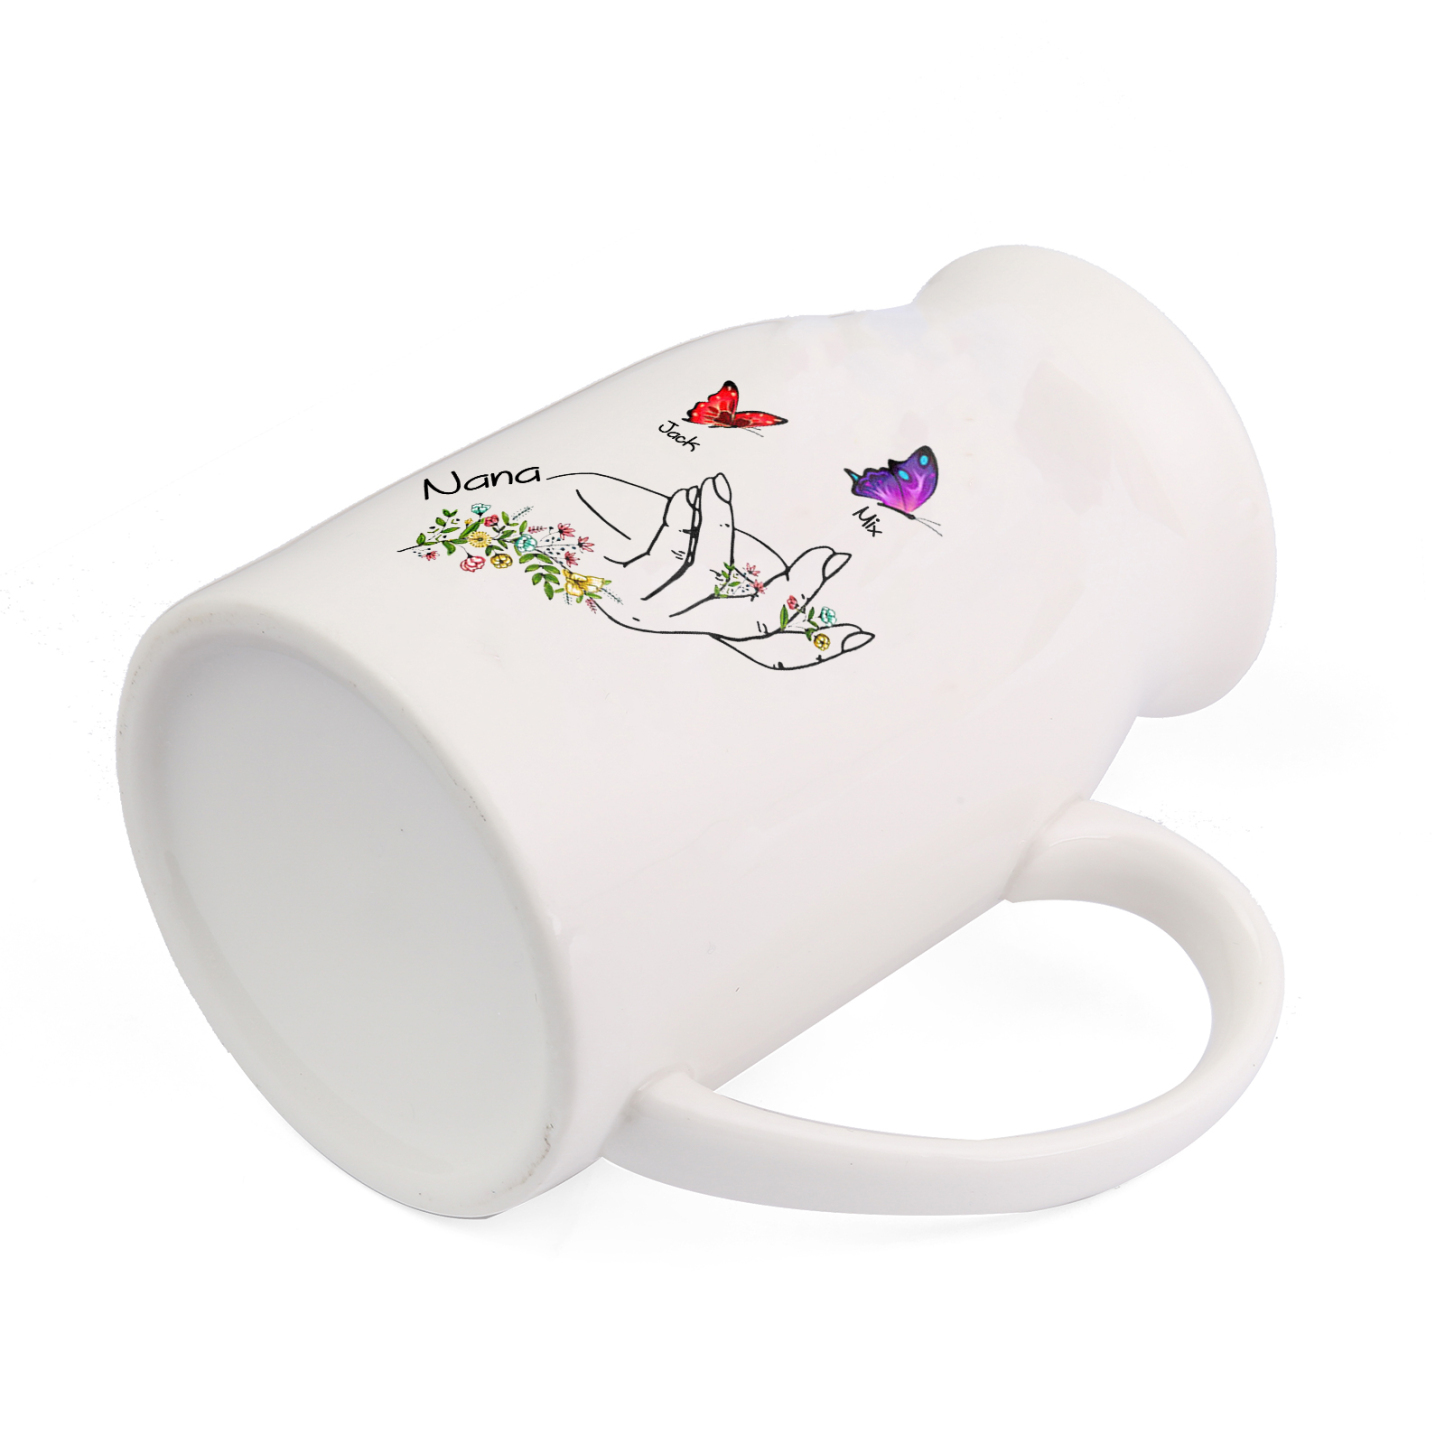 2 Names - Personalized Exquisite Flower Hand Butterfly Style Ceramic Cup With Customizable Names As a Special Gift For Mom